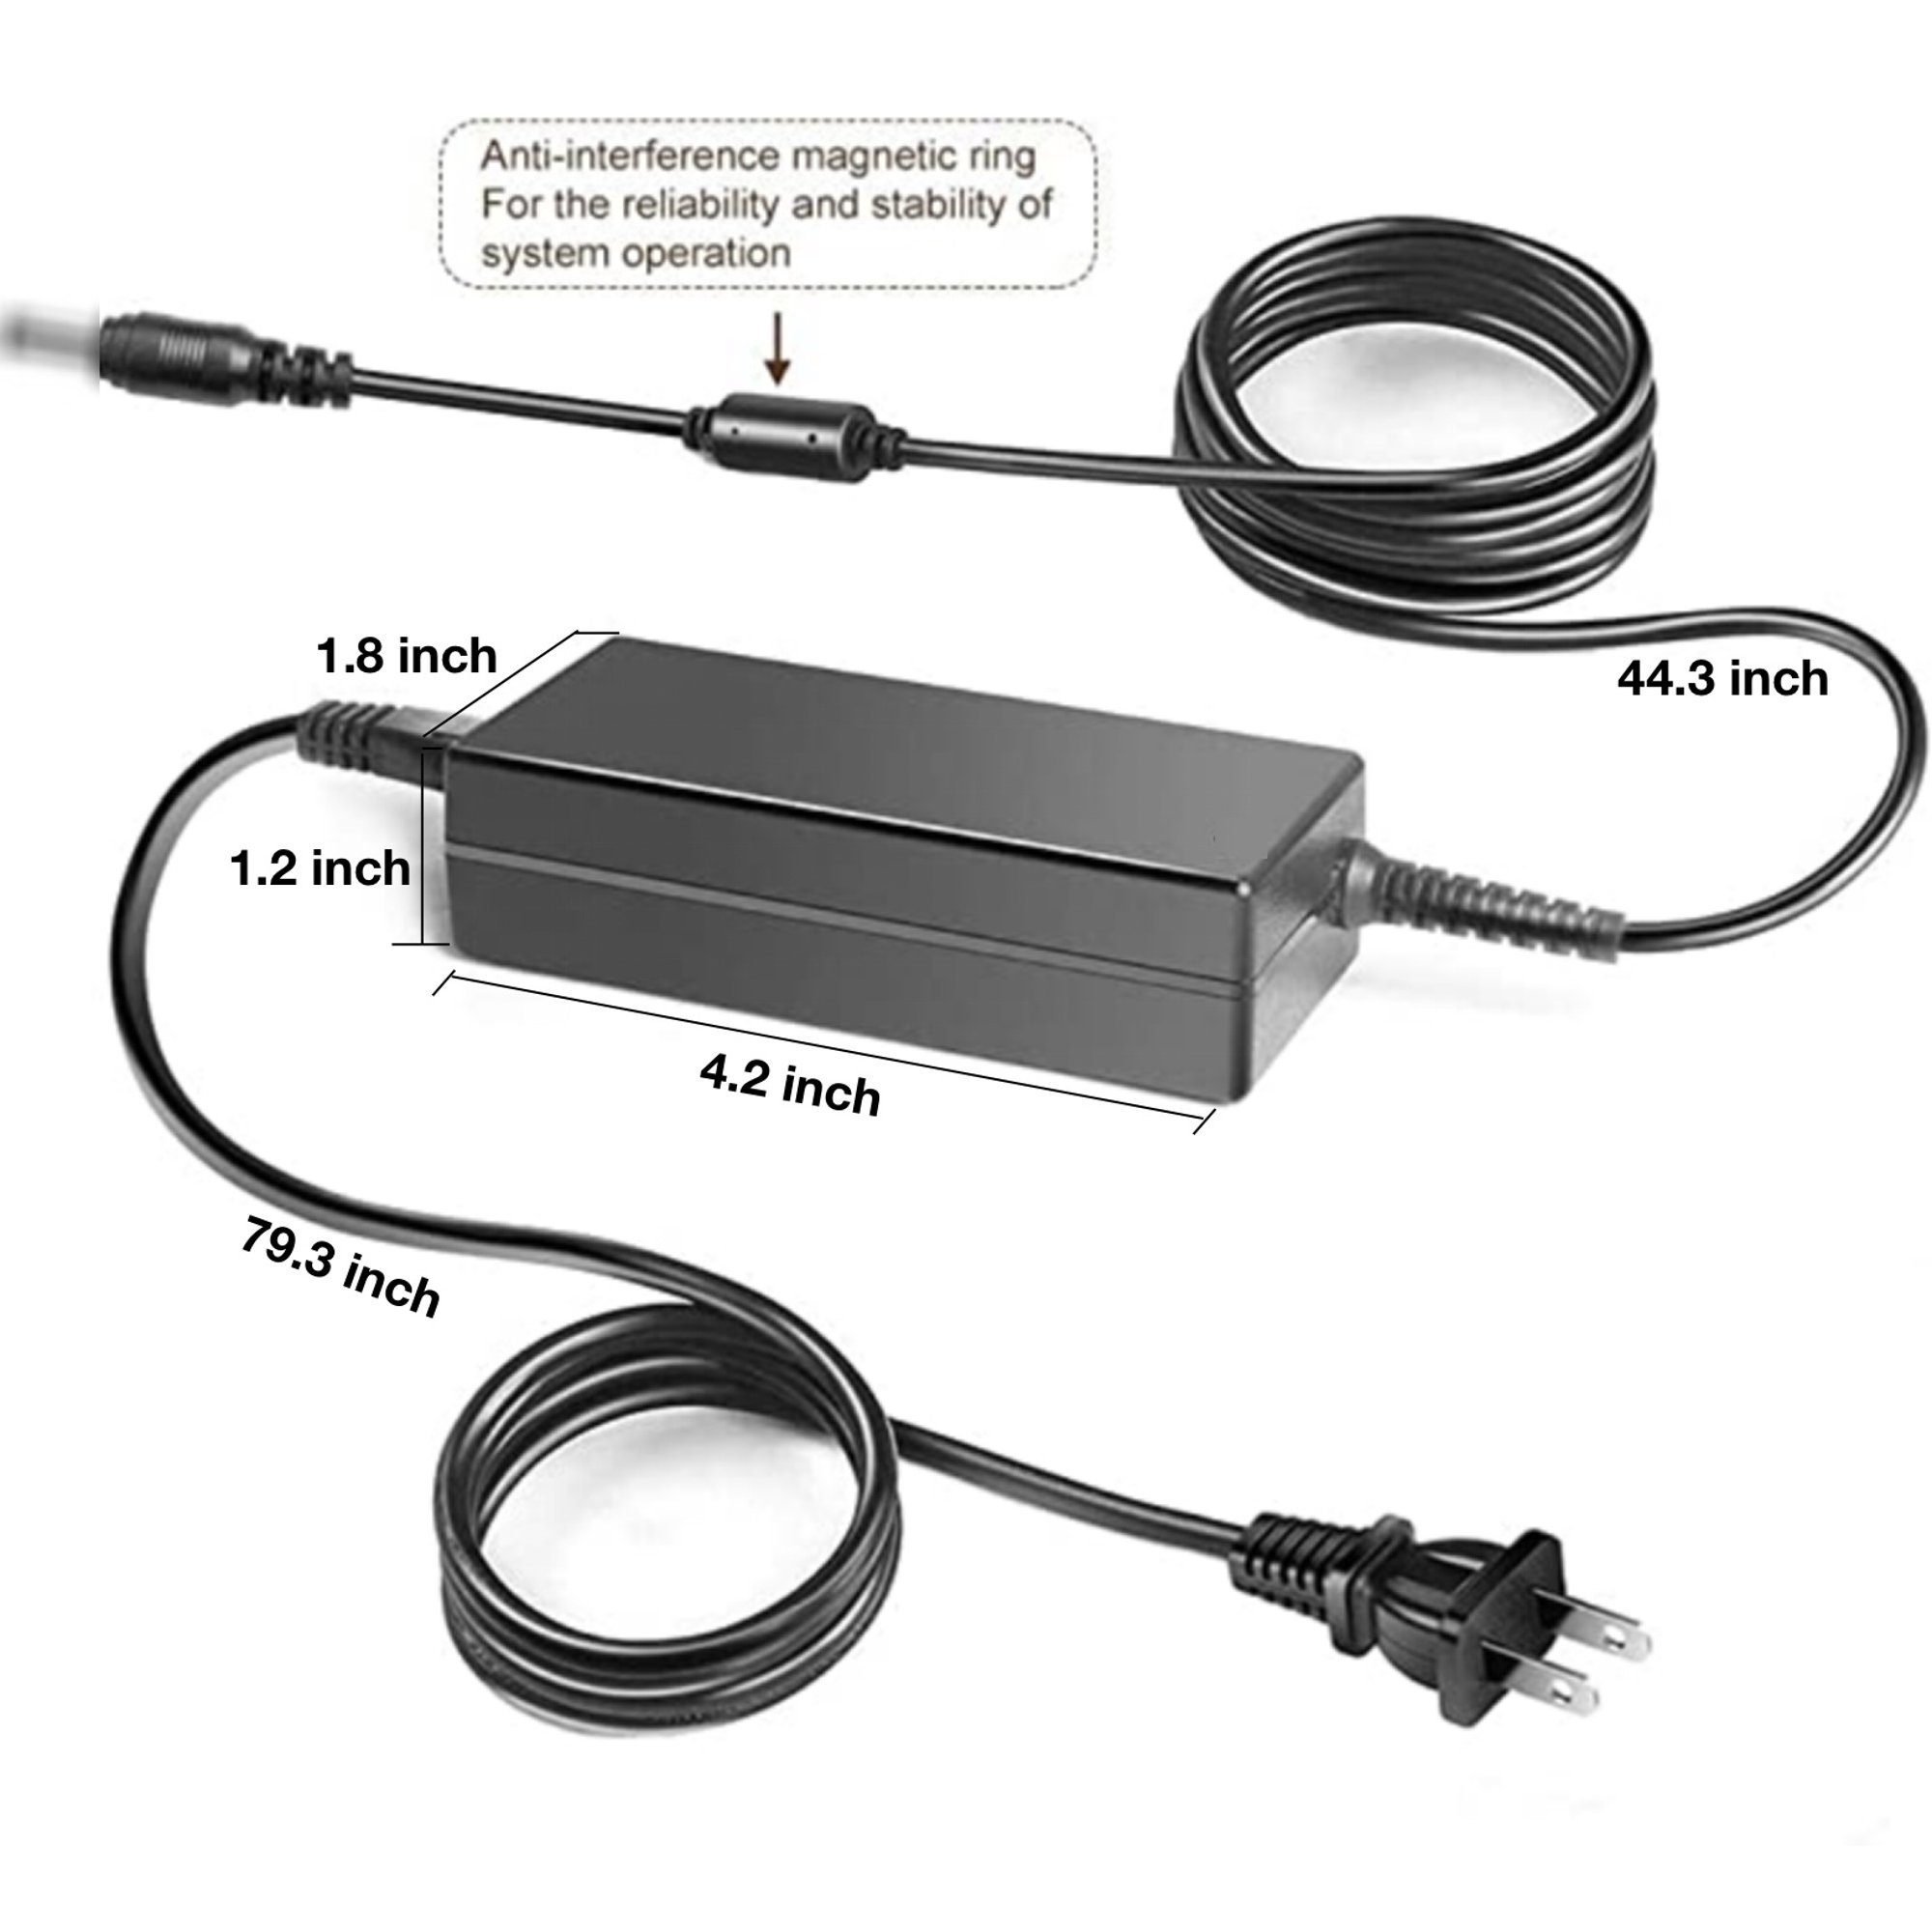 16V 2.5A AC/DC Adapter for Fujitsu SV600 FI-SV600 FI-SV600A FI-SV600A-P PA03641-B305 fi-7030 PA03750-B005 PA03750-B001 N7100 PA03706-B205 Scanner, FMC-AC313S Power Supply - image 3 of 5